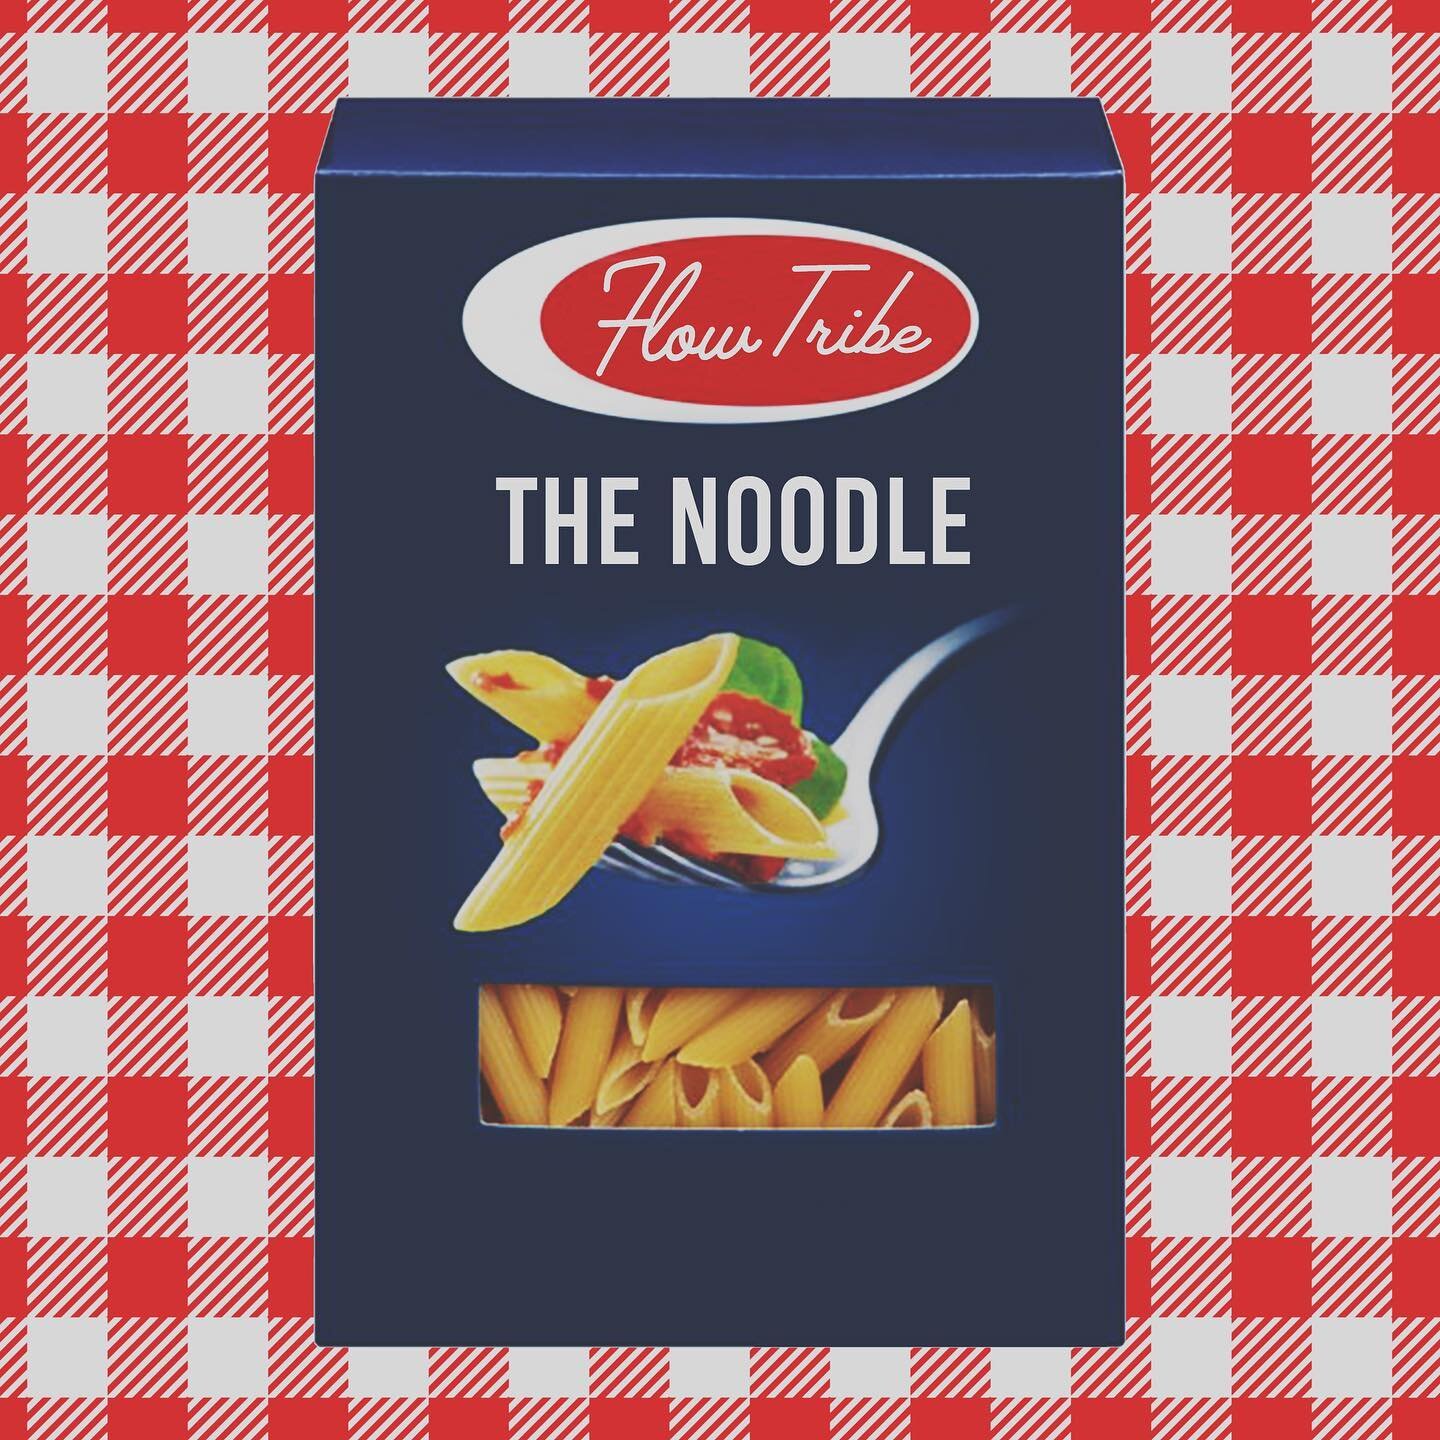 Get ready to eat up our new single &ldquo;The Noodle&rdquo; on Fri. Sept. 2nd. This one will get those good times cooking baby!

Presave &ldquo;The Noodle&rdquo; here:
https://distrokid.com/hyperfollow/flowtribe/noodle